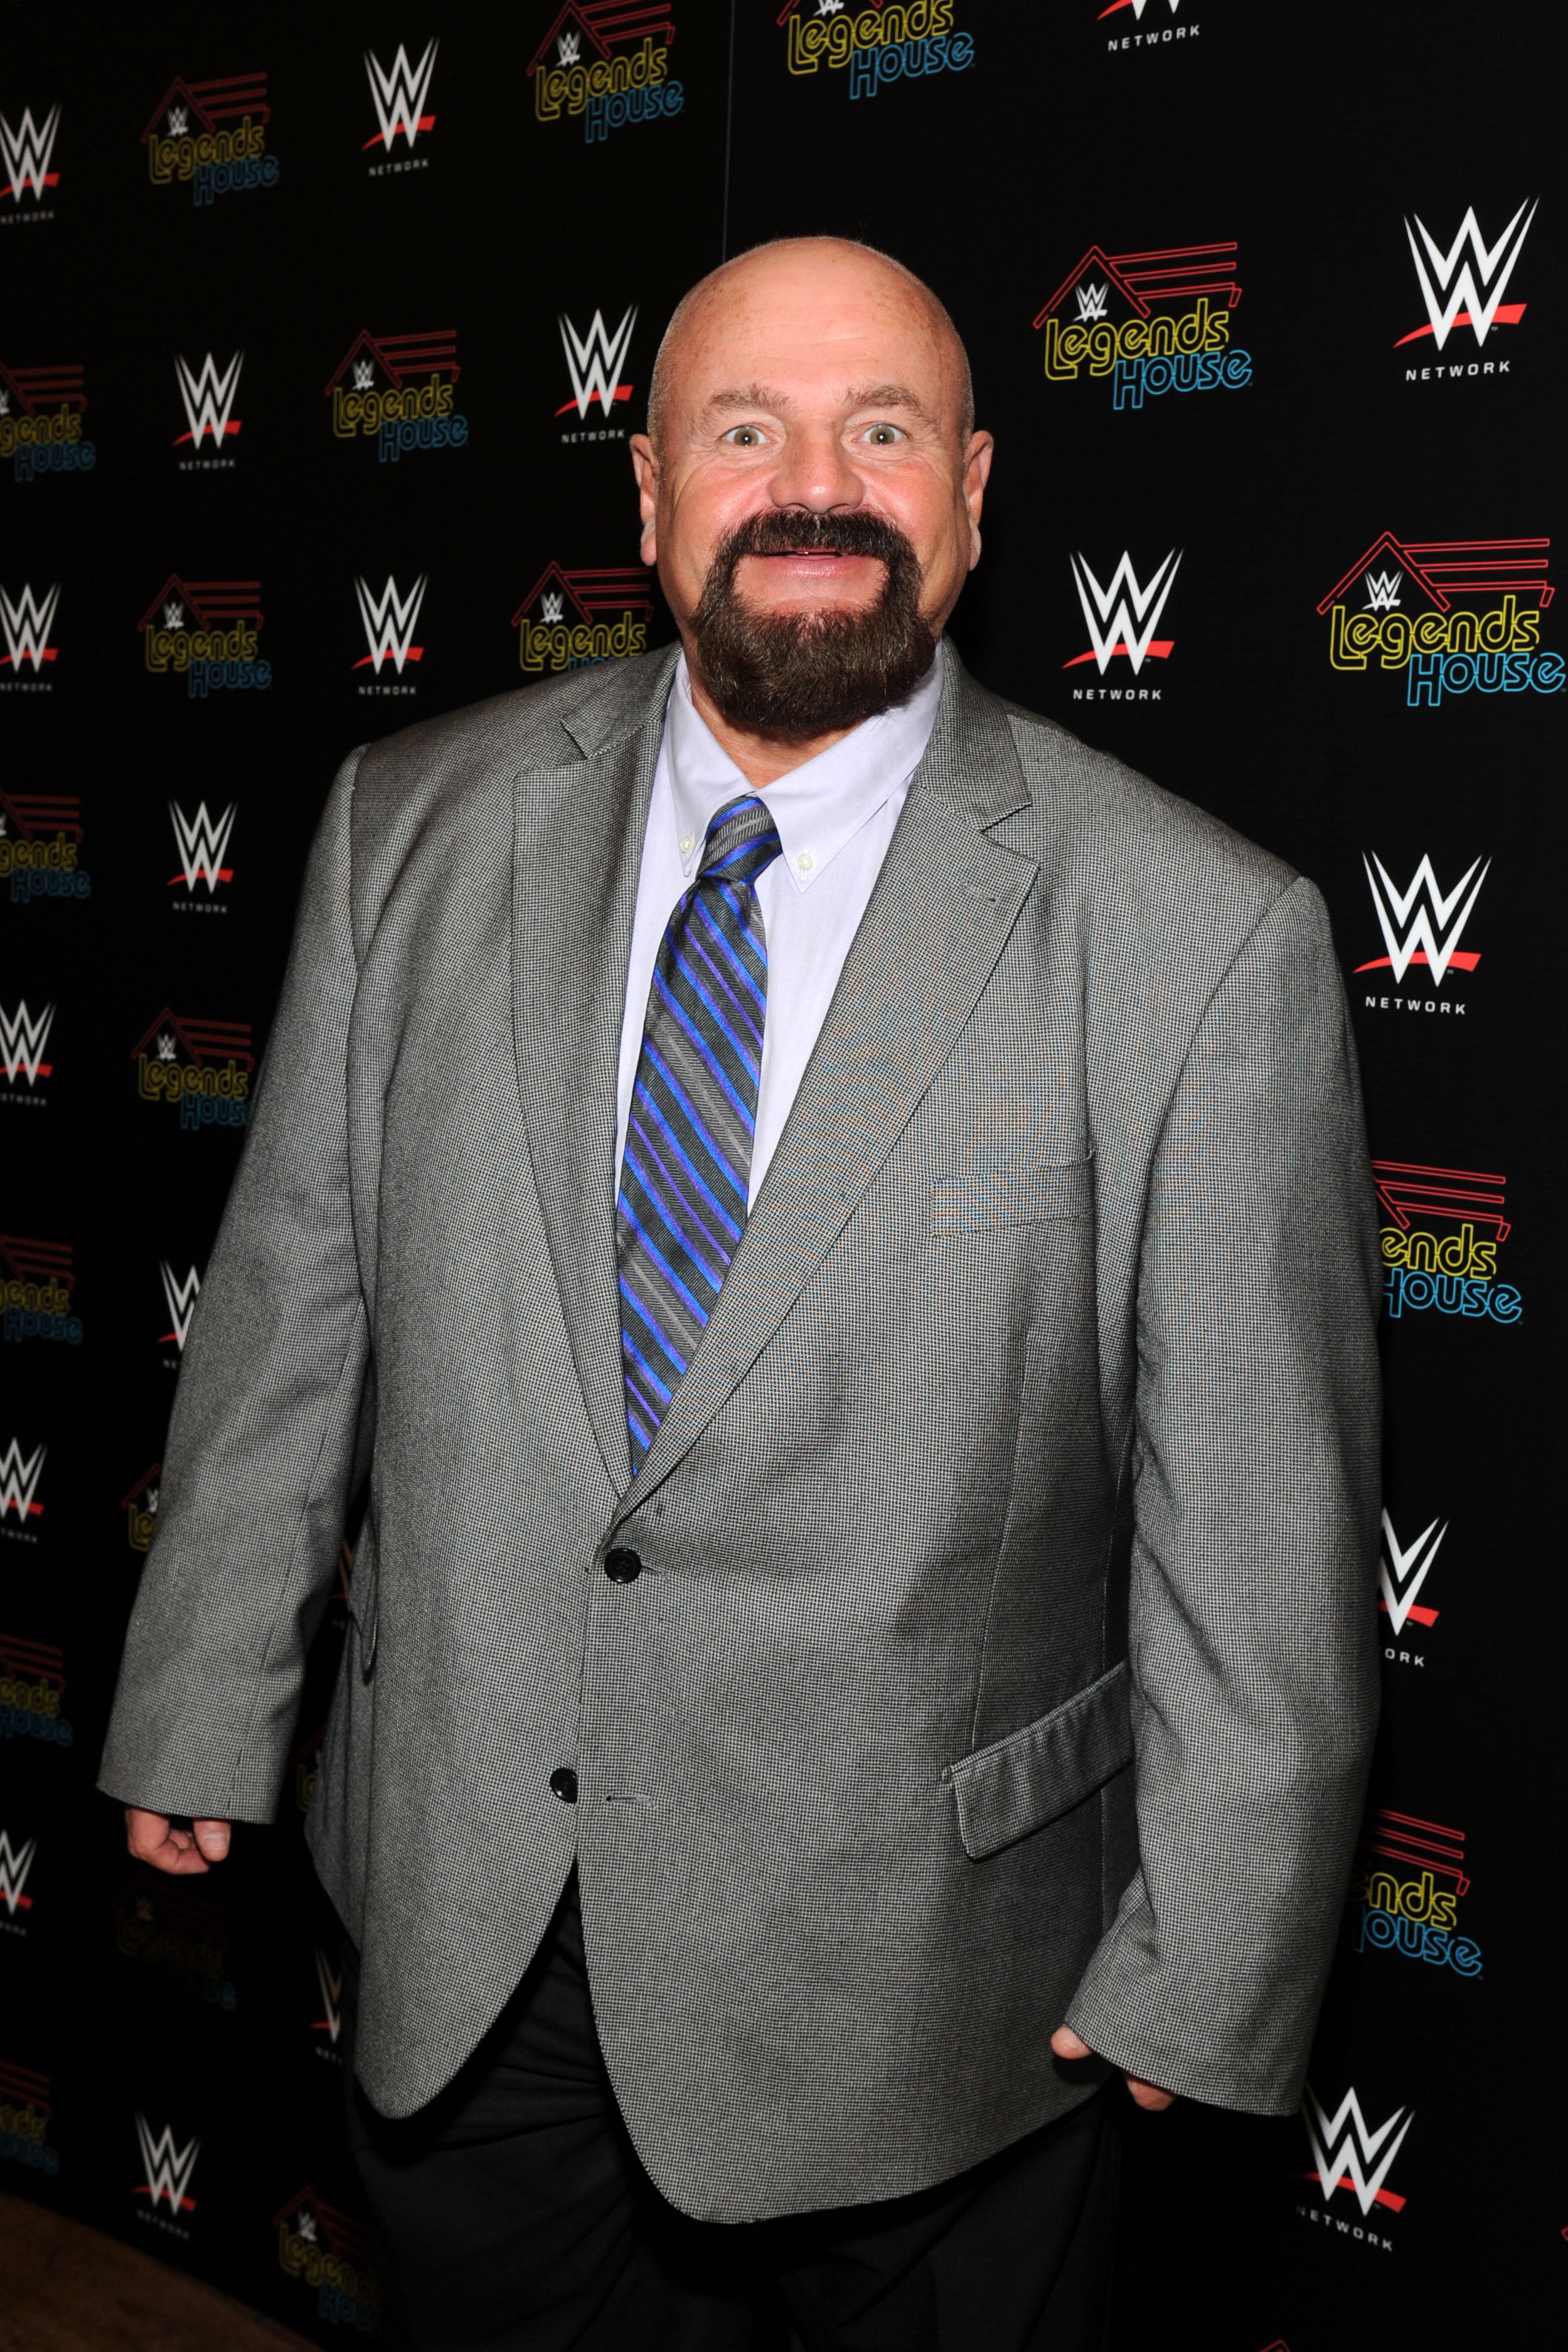 Howard Finkel attends the WWE screening of "Legends' House" on April 15, 2014, in New York City. | Source: Getty Images.